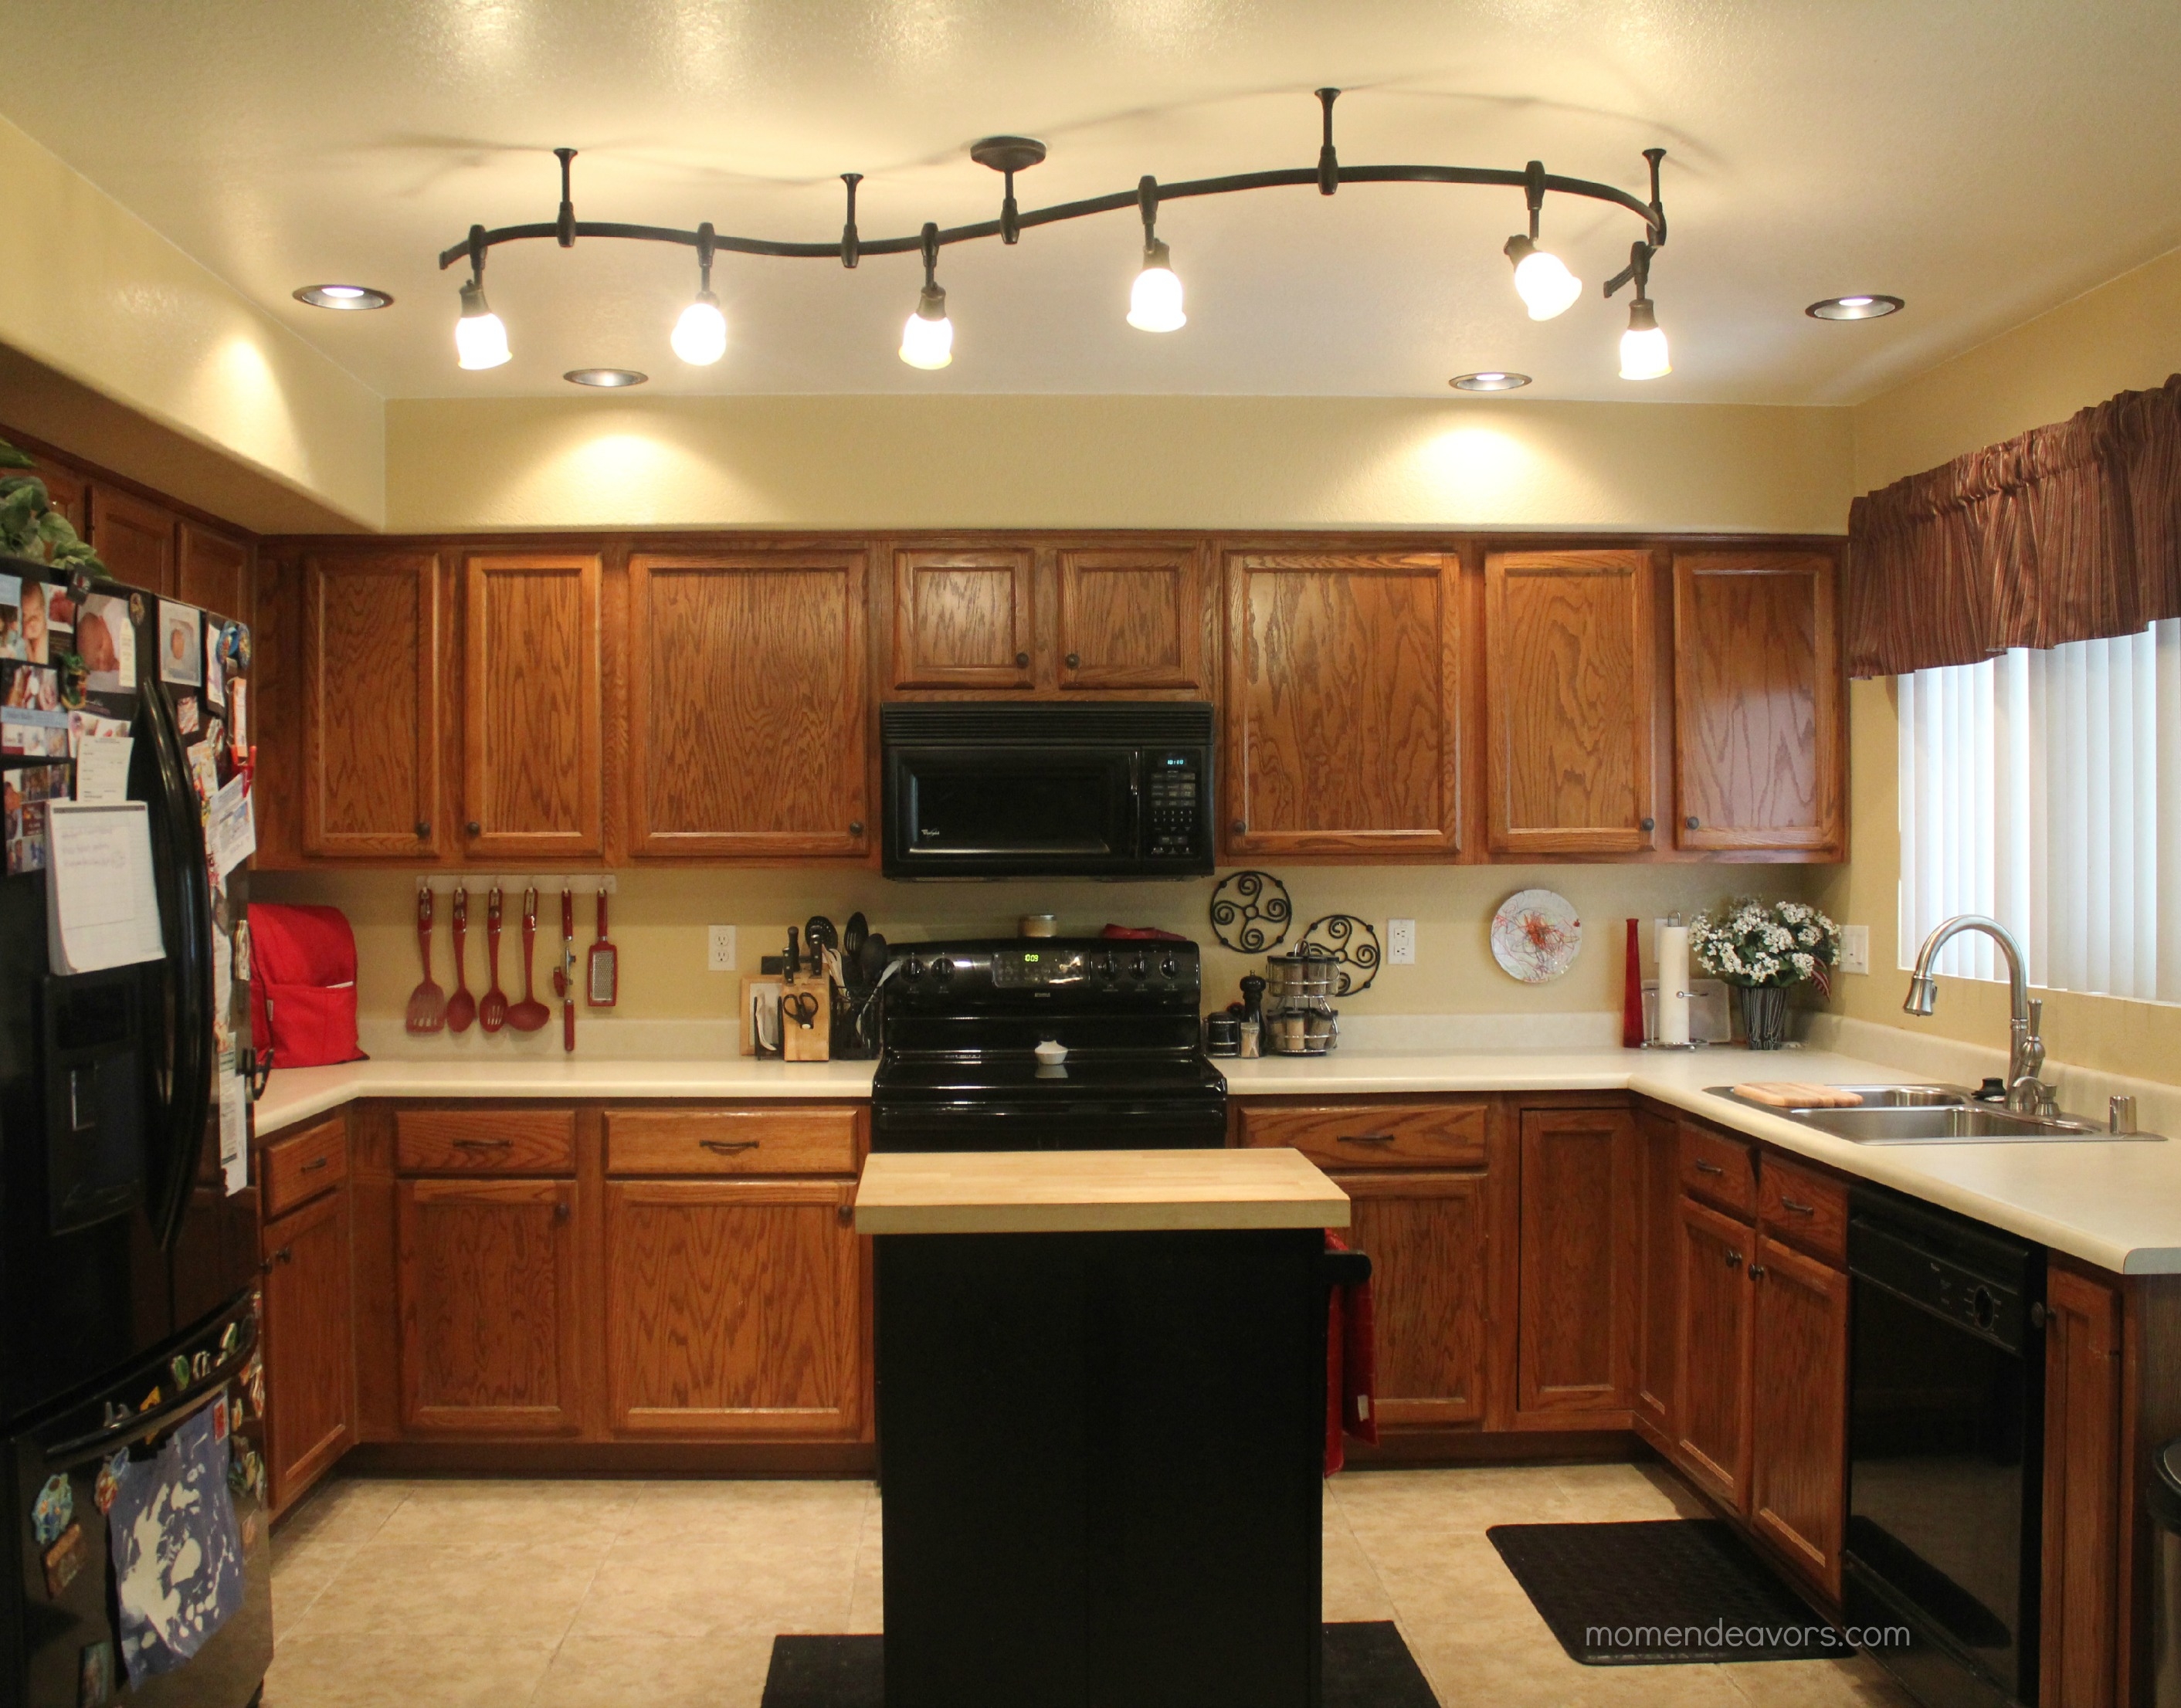 Permalink to Best Lights For Kitchen Ceilings